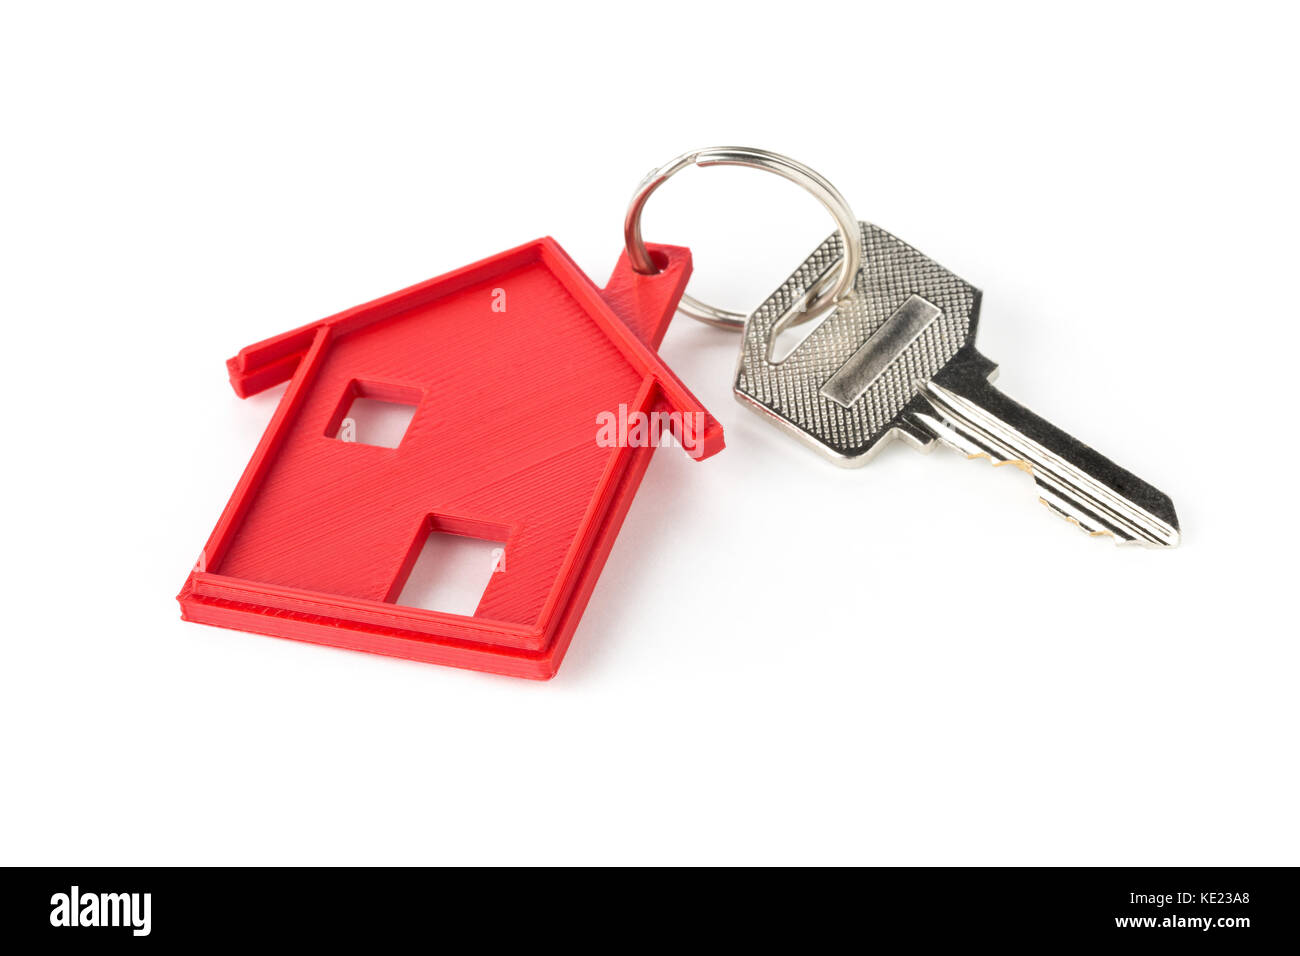 House door key with red house key chain pendant over white background Stock Photo